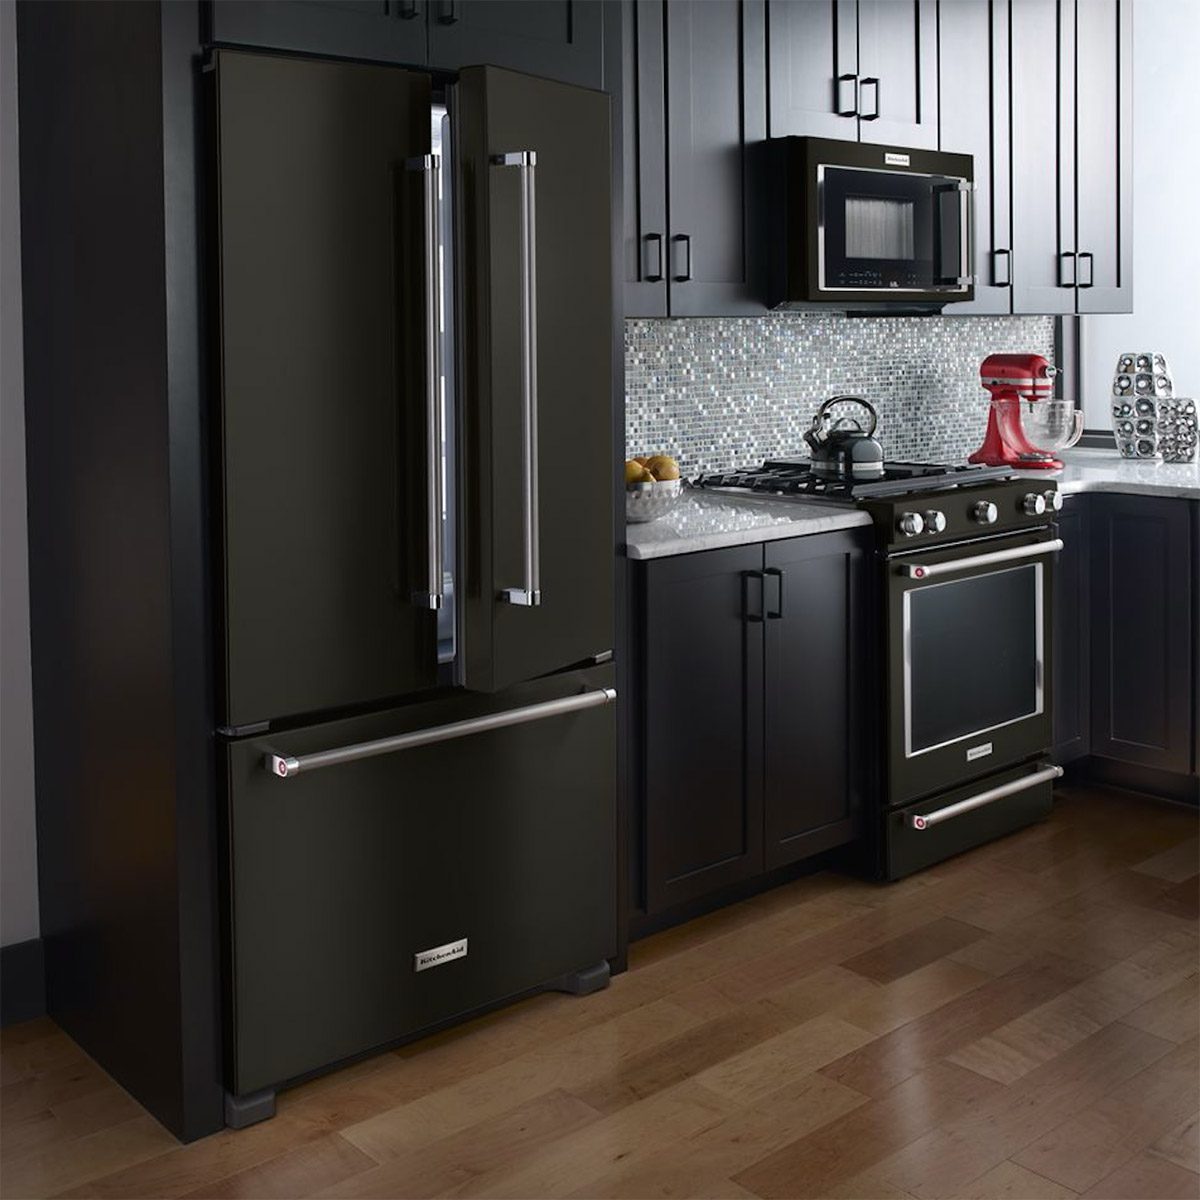 Home Trend: Black Stainless Steel Appliances — The Family Handyman